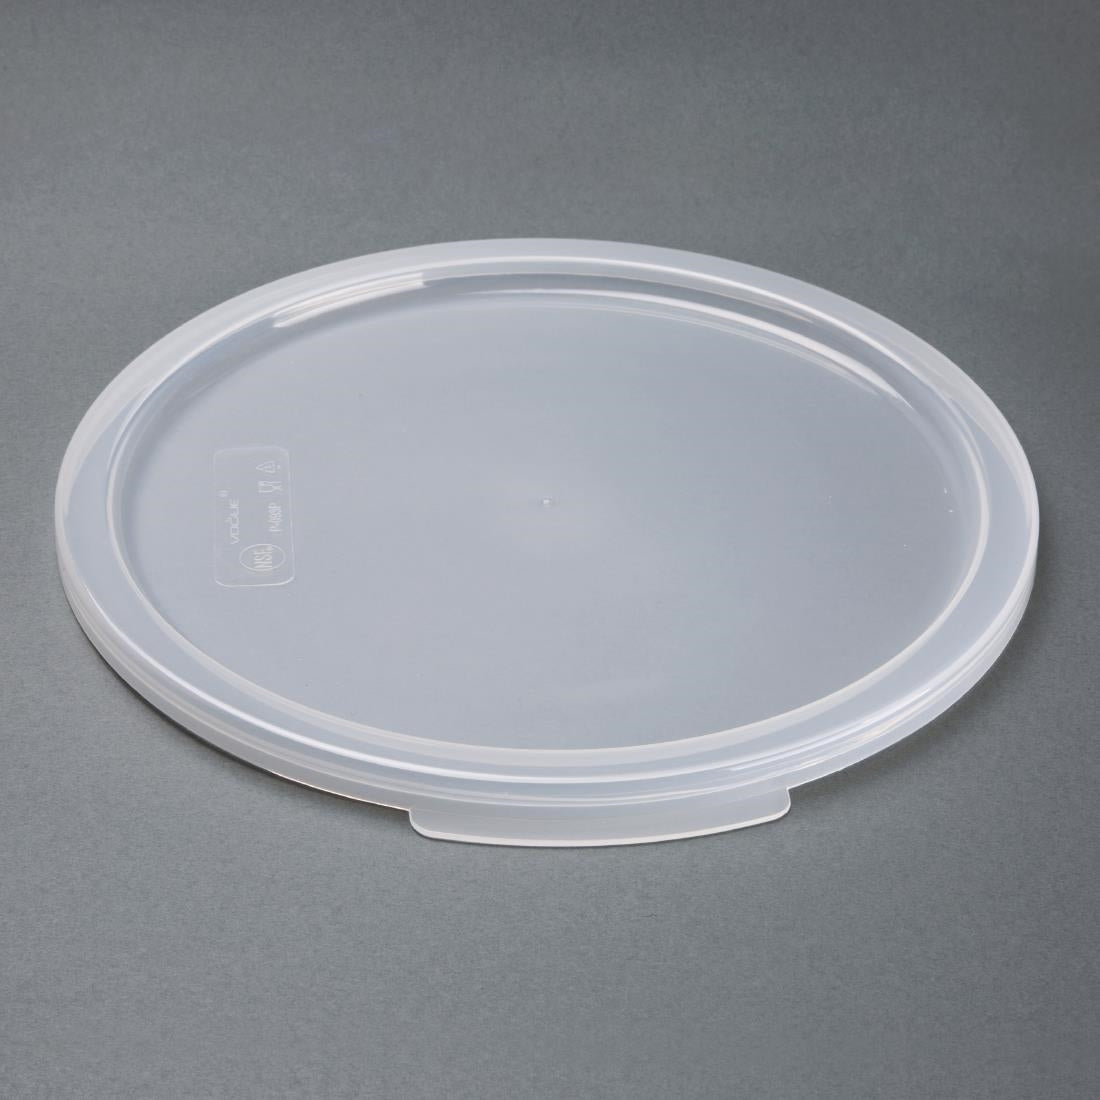 DJ963 Lid for Vogue Round Food Storage Container 7.5Ltr JD Catering Equipment Solutions Ltd